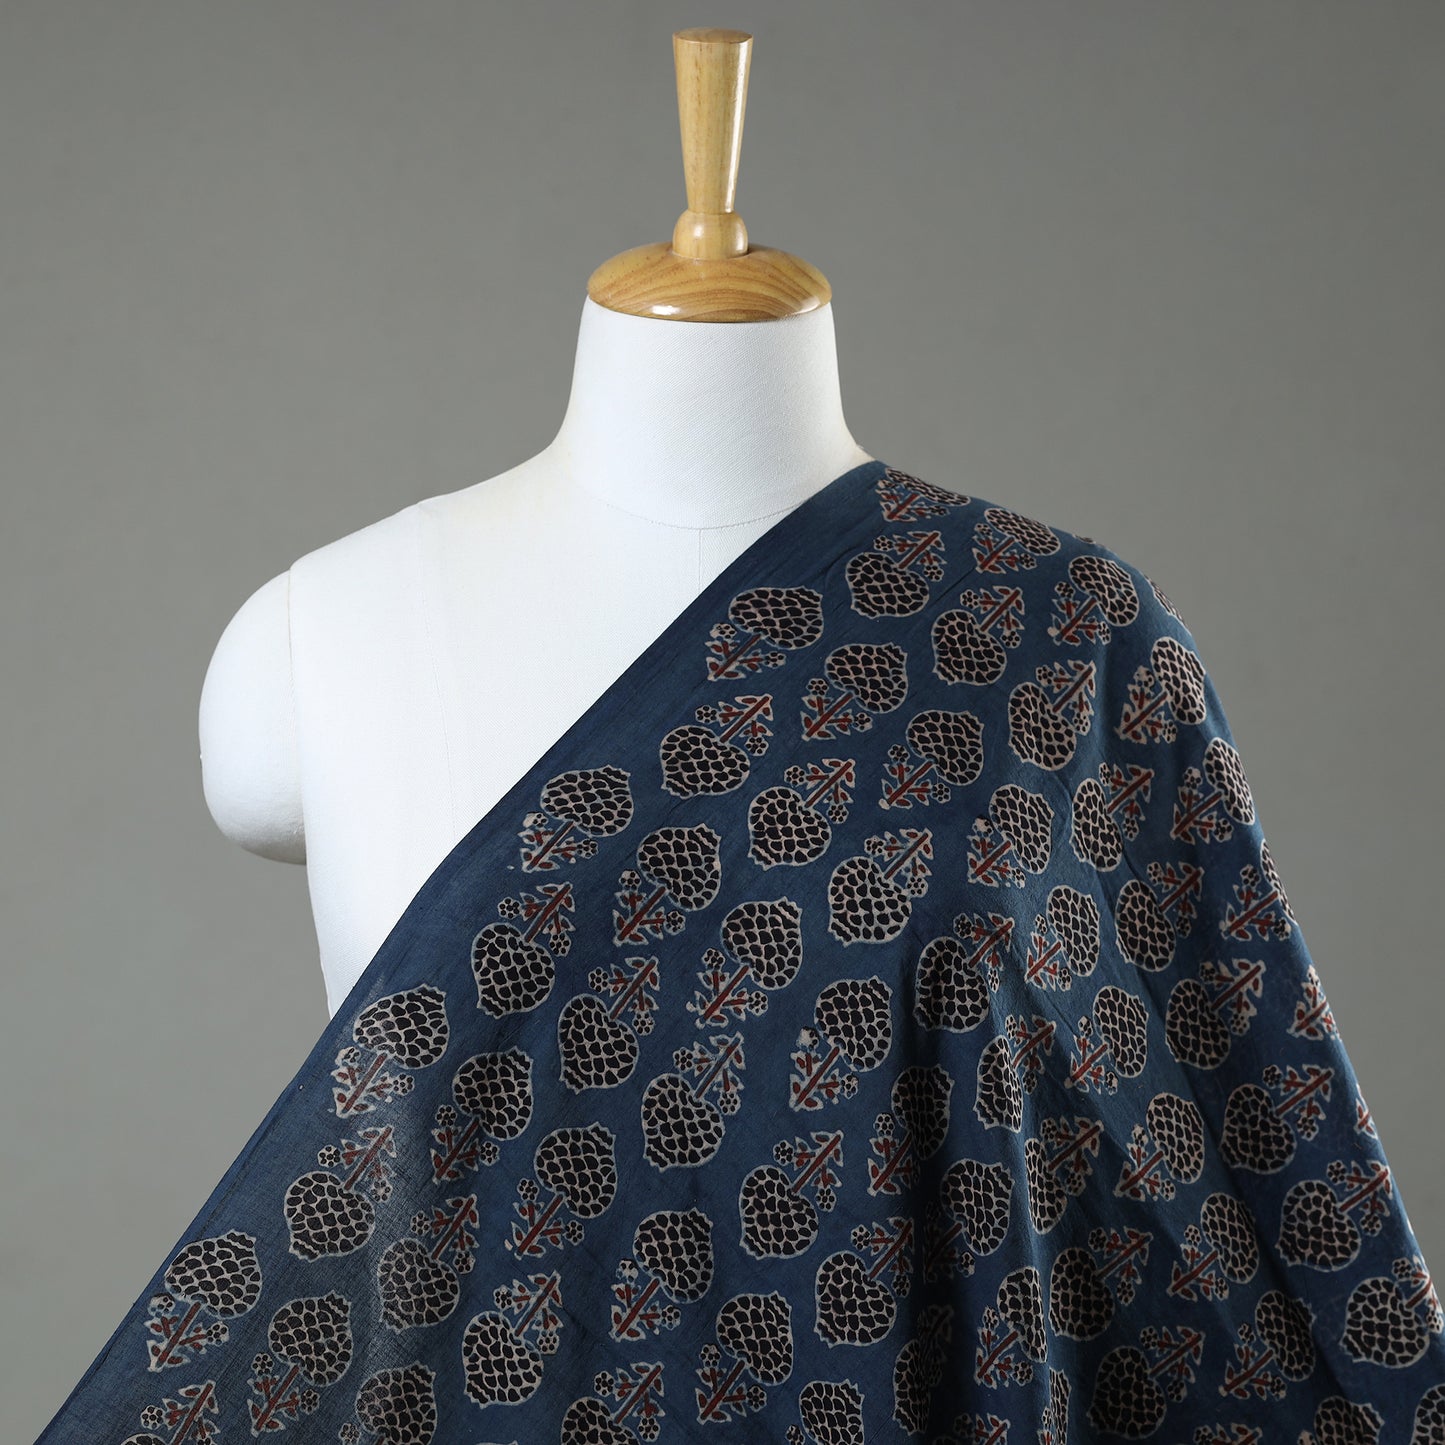 Blue - Ajrakh Hand Block Printed Natural Dyed Mul Cotton Fabric 02